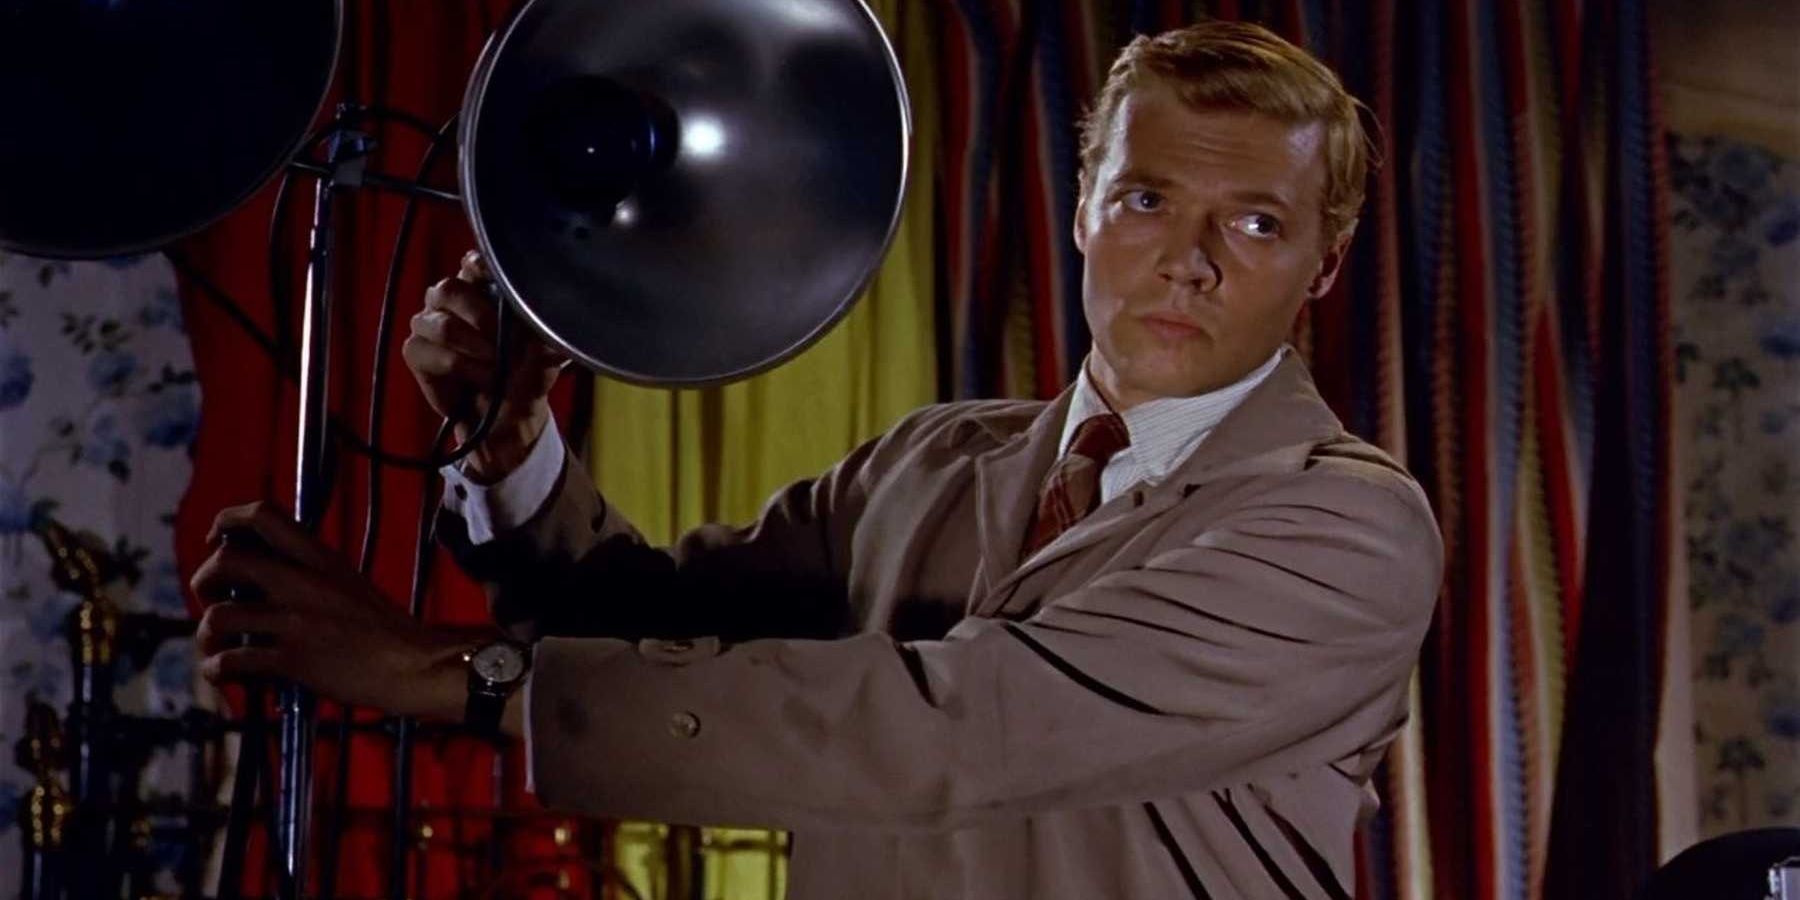 Mark Lewis with his killer camera in Peeping Tom